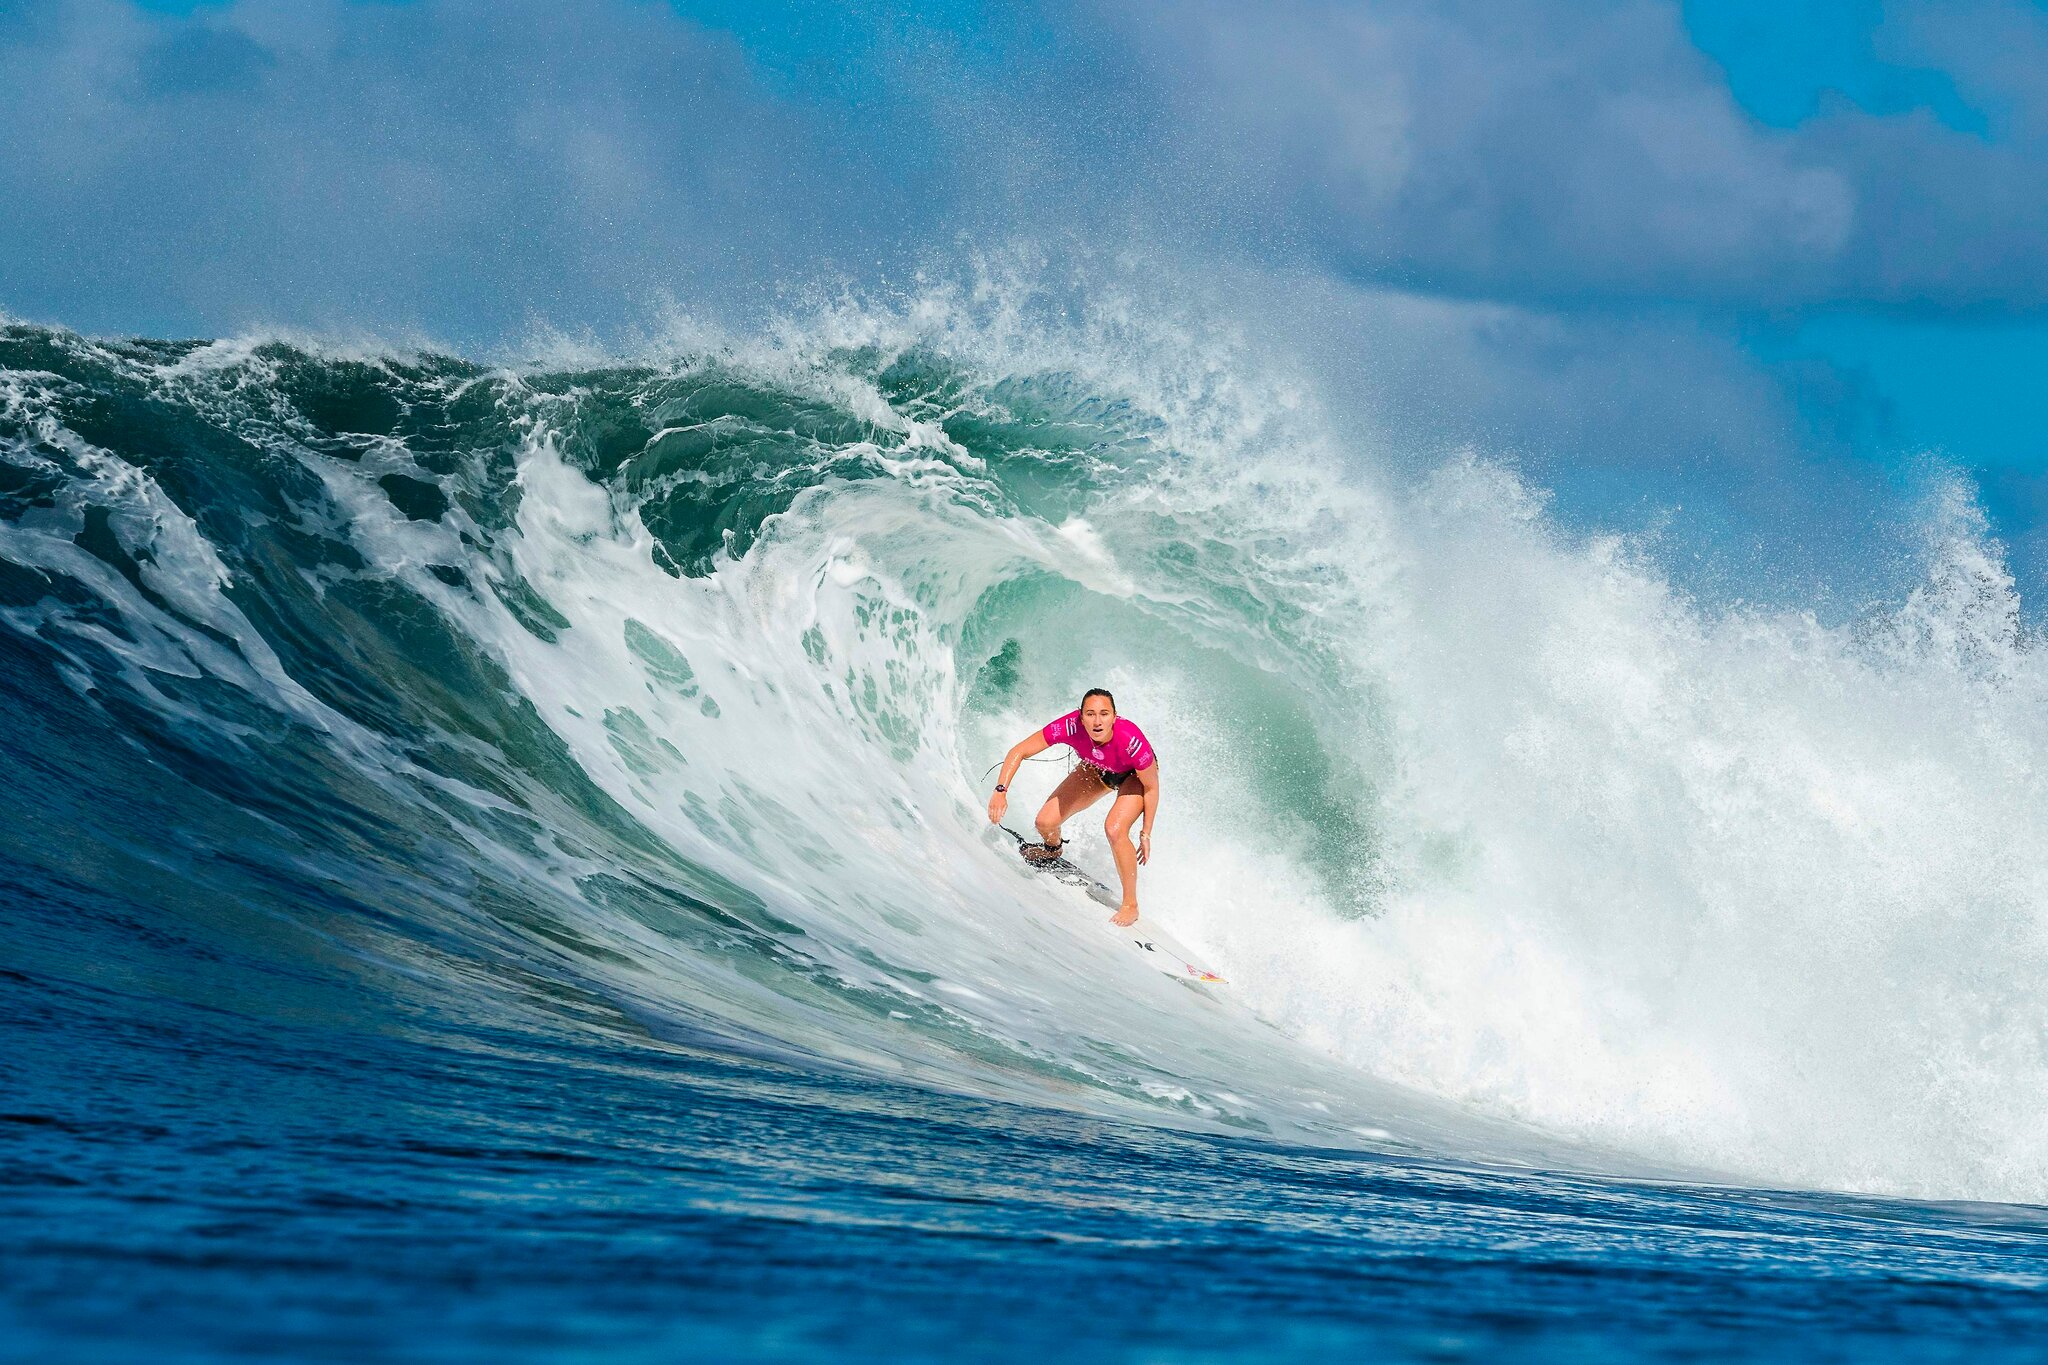 image of female surfer Carissa Moore catching a wave from her professional website